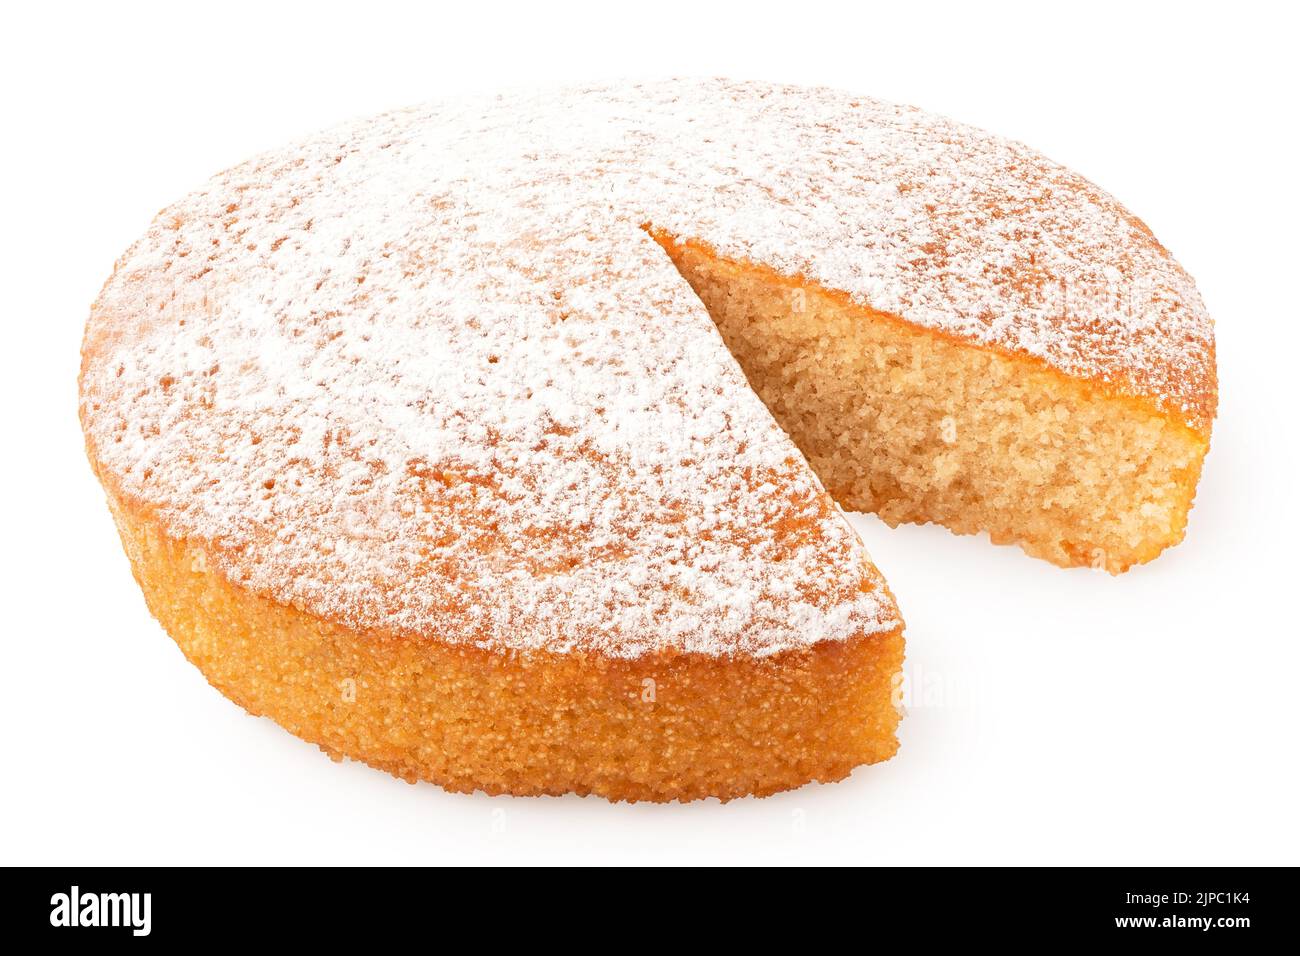 Lemon sponge cake with icing sugar topping and wedge missing isolated on white. Stock Photo